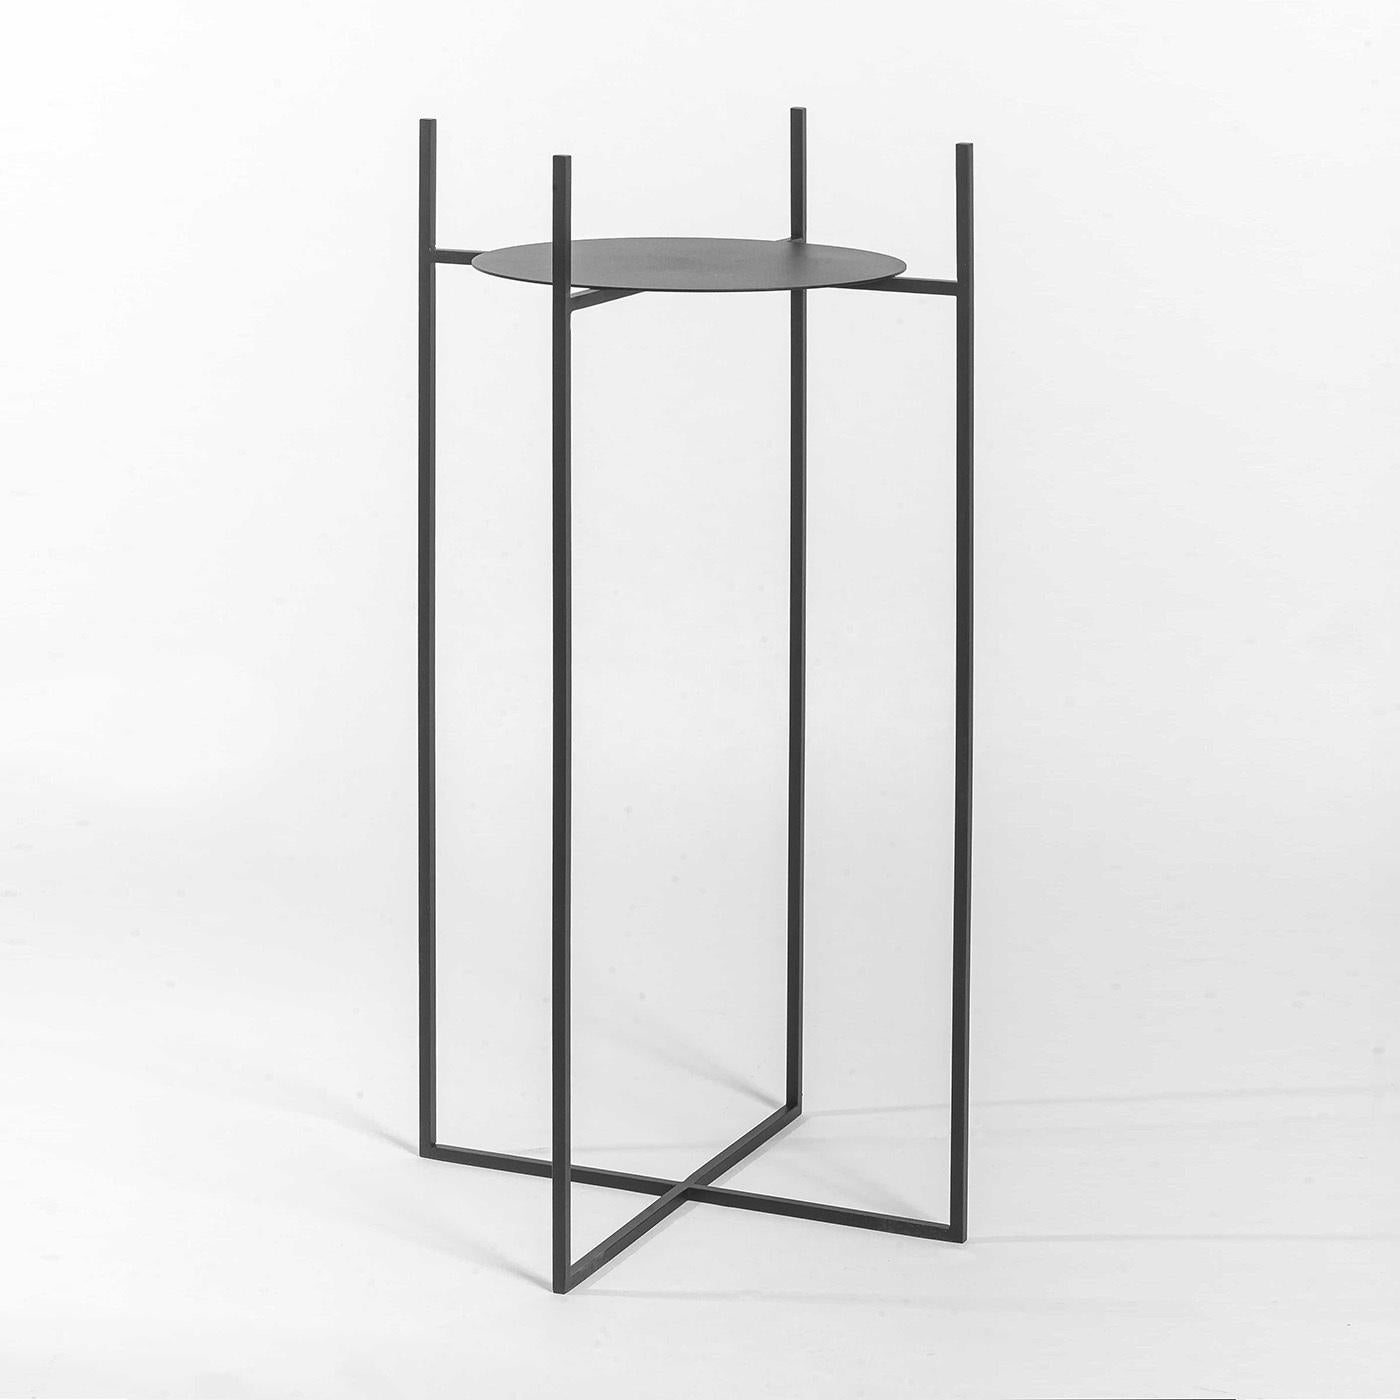 Inspired by Op Art of the 1960s, this exceptional steel plant holder (H 80cm) is characterized by an exclusive material made of interwoven black- and natural-finished aluminum sheets, created exclusively by Inthegardern Design Studio. Standing 70cm